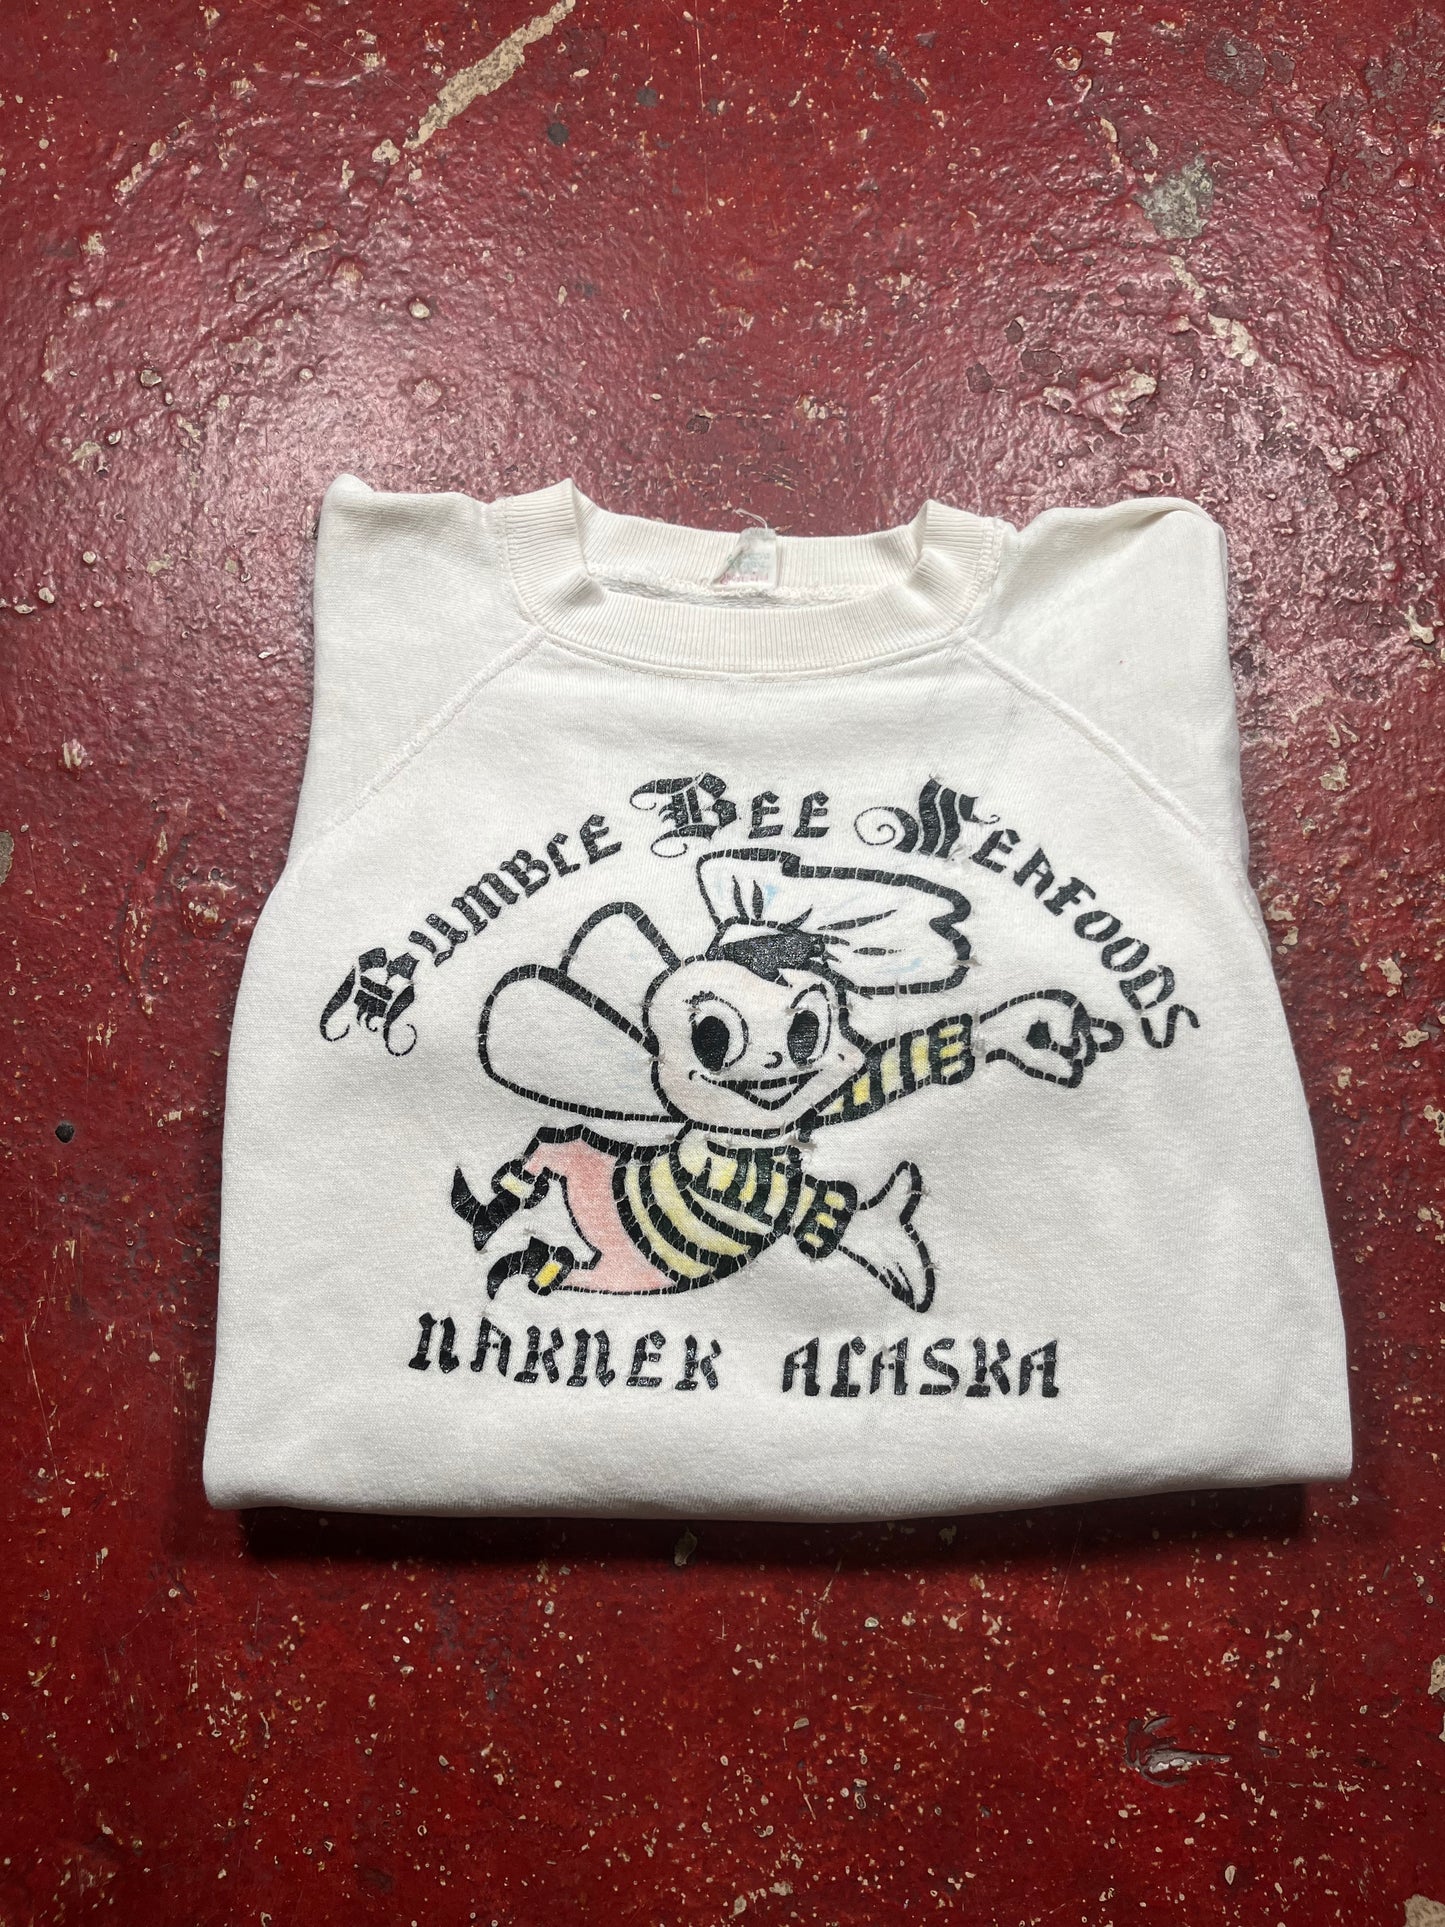 60s Bumble Bee Seafoods Sweater